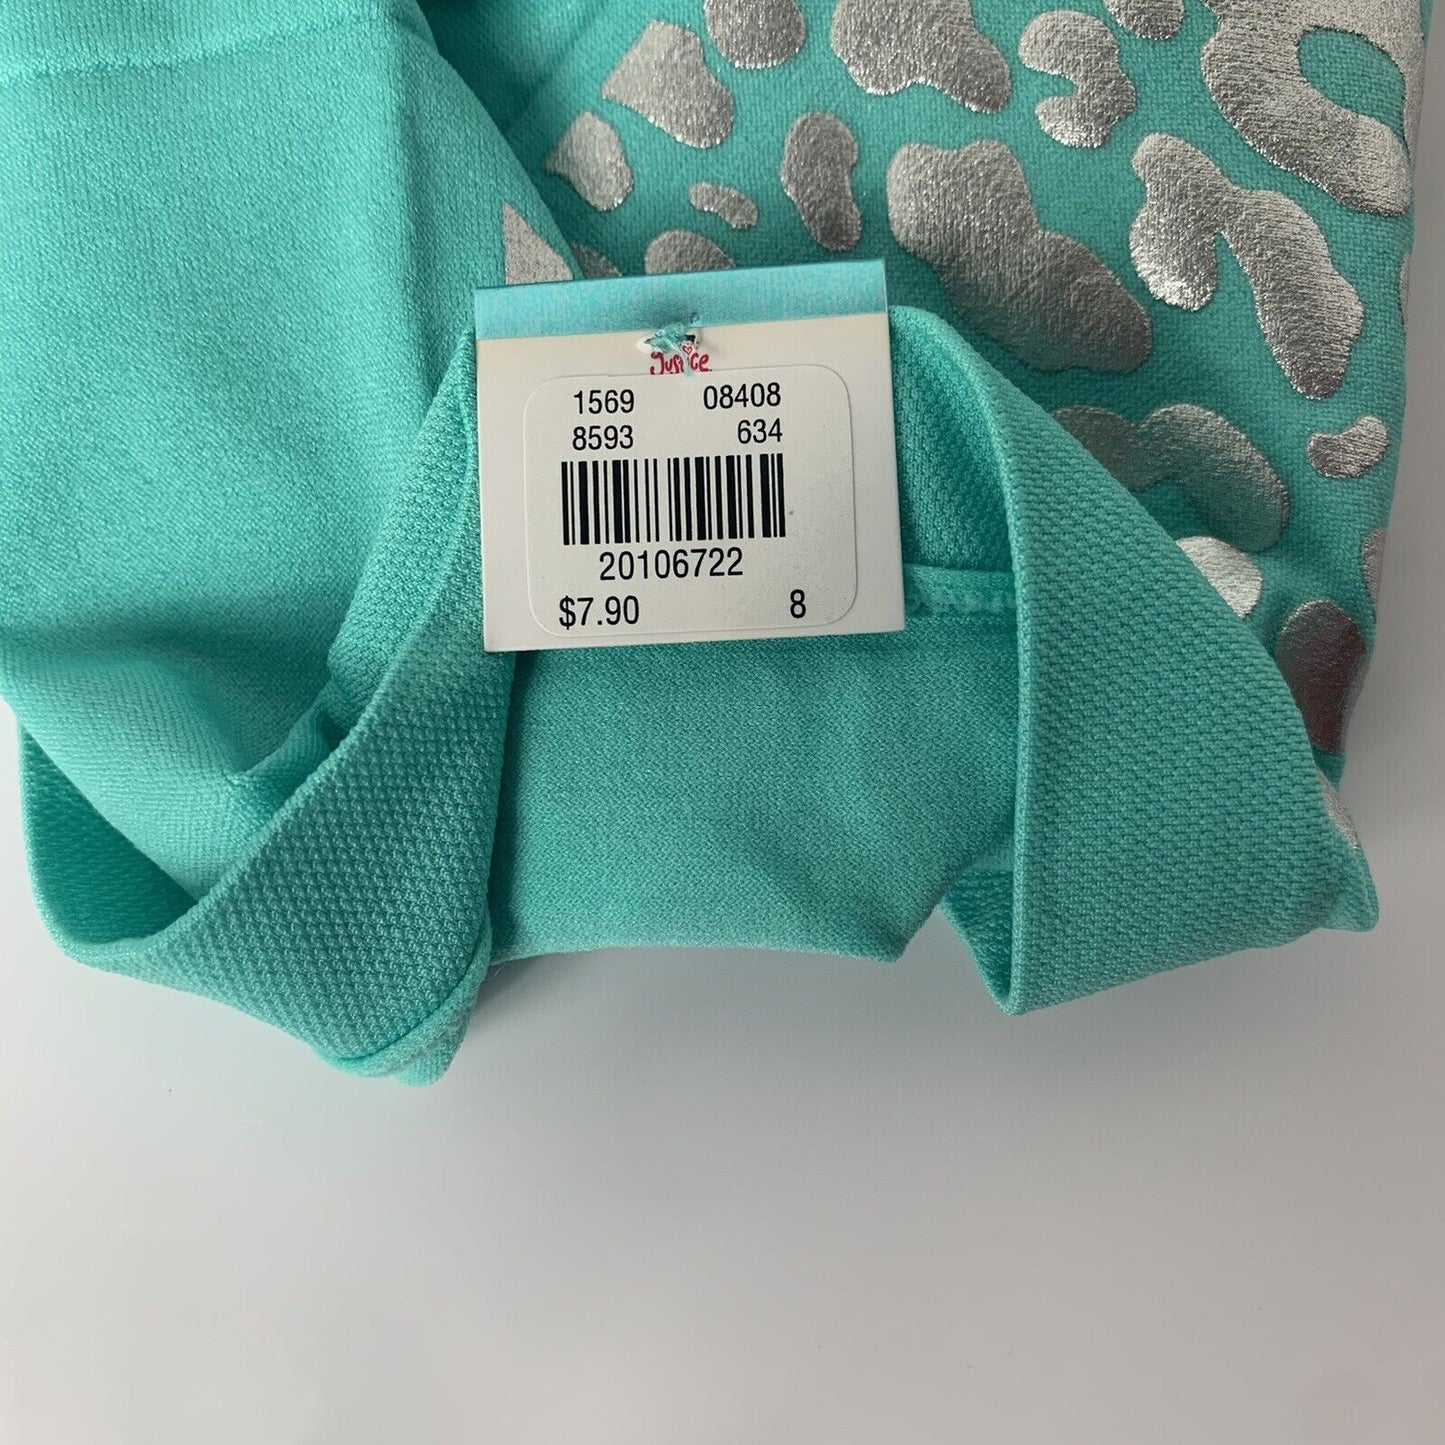 NEW Justice Shortie Breathable Girls sz 8, Mint Green, Silver Leopard Print